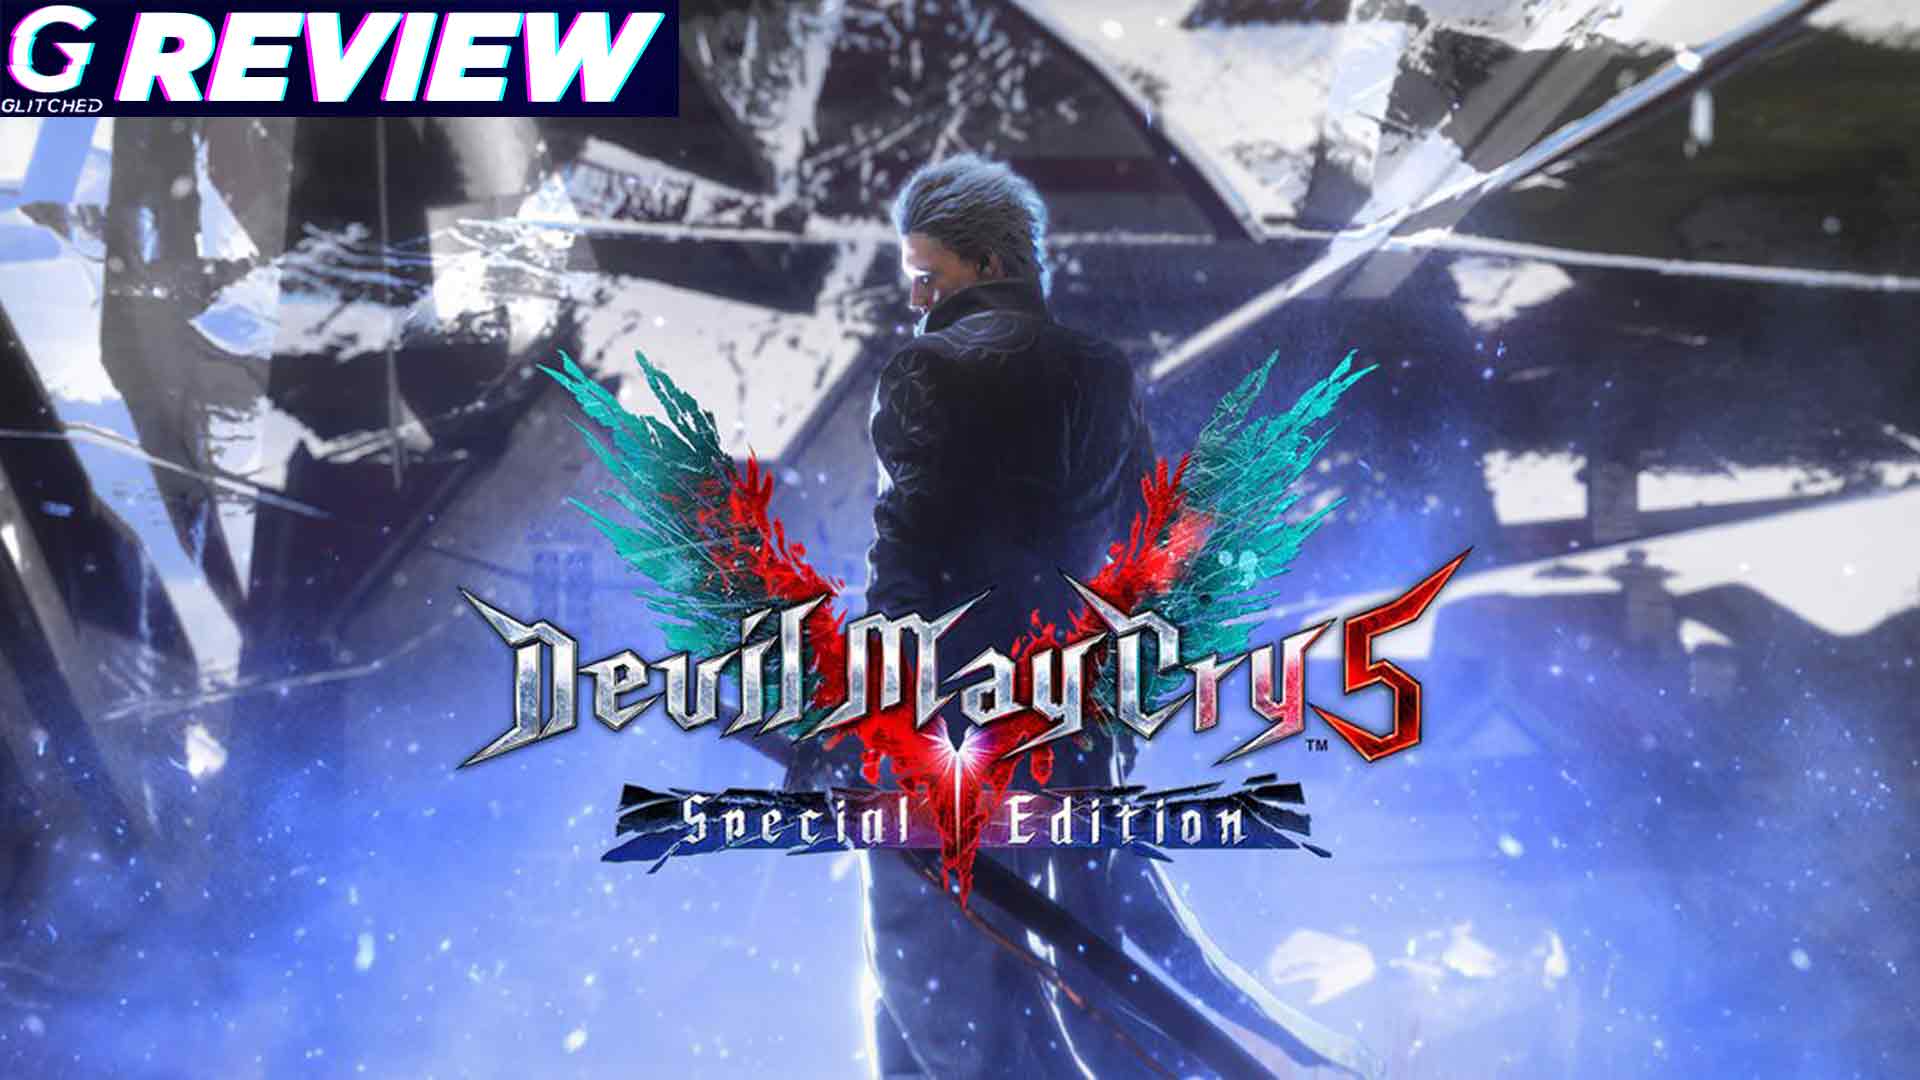 Devil May Cry 5: Special Edition Review